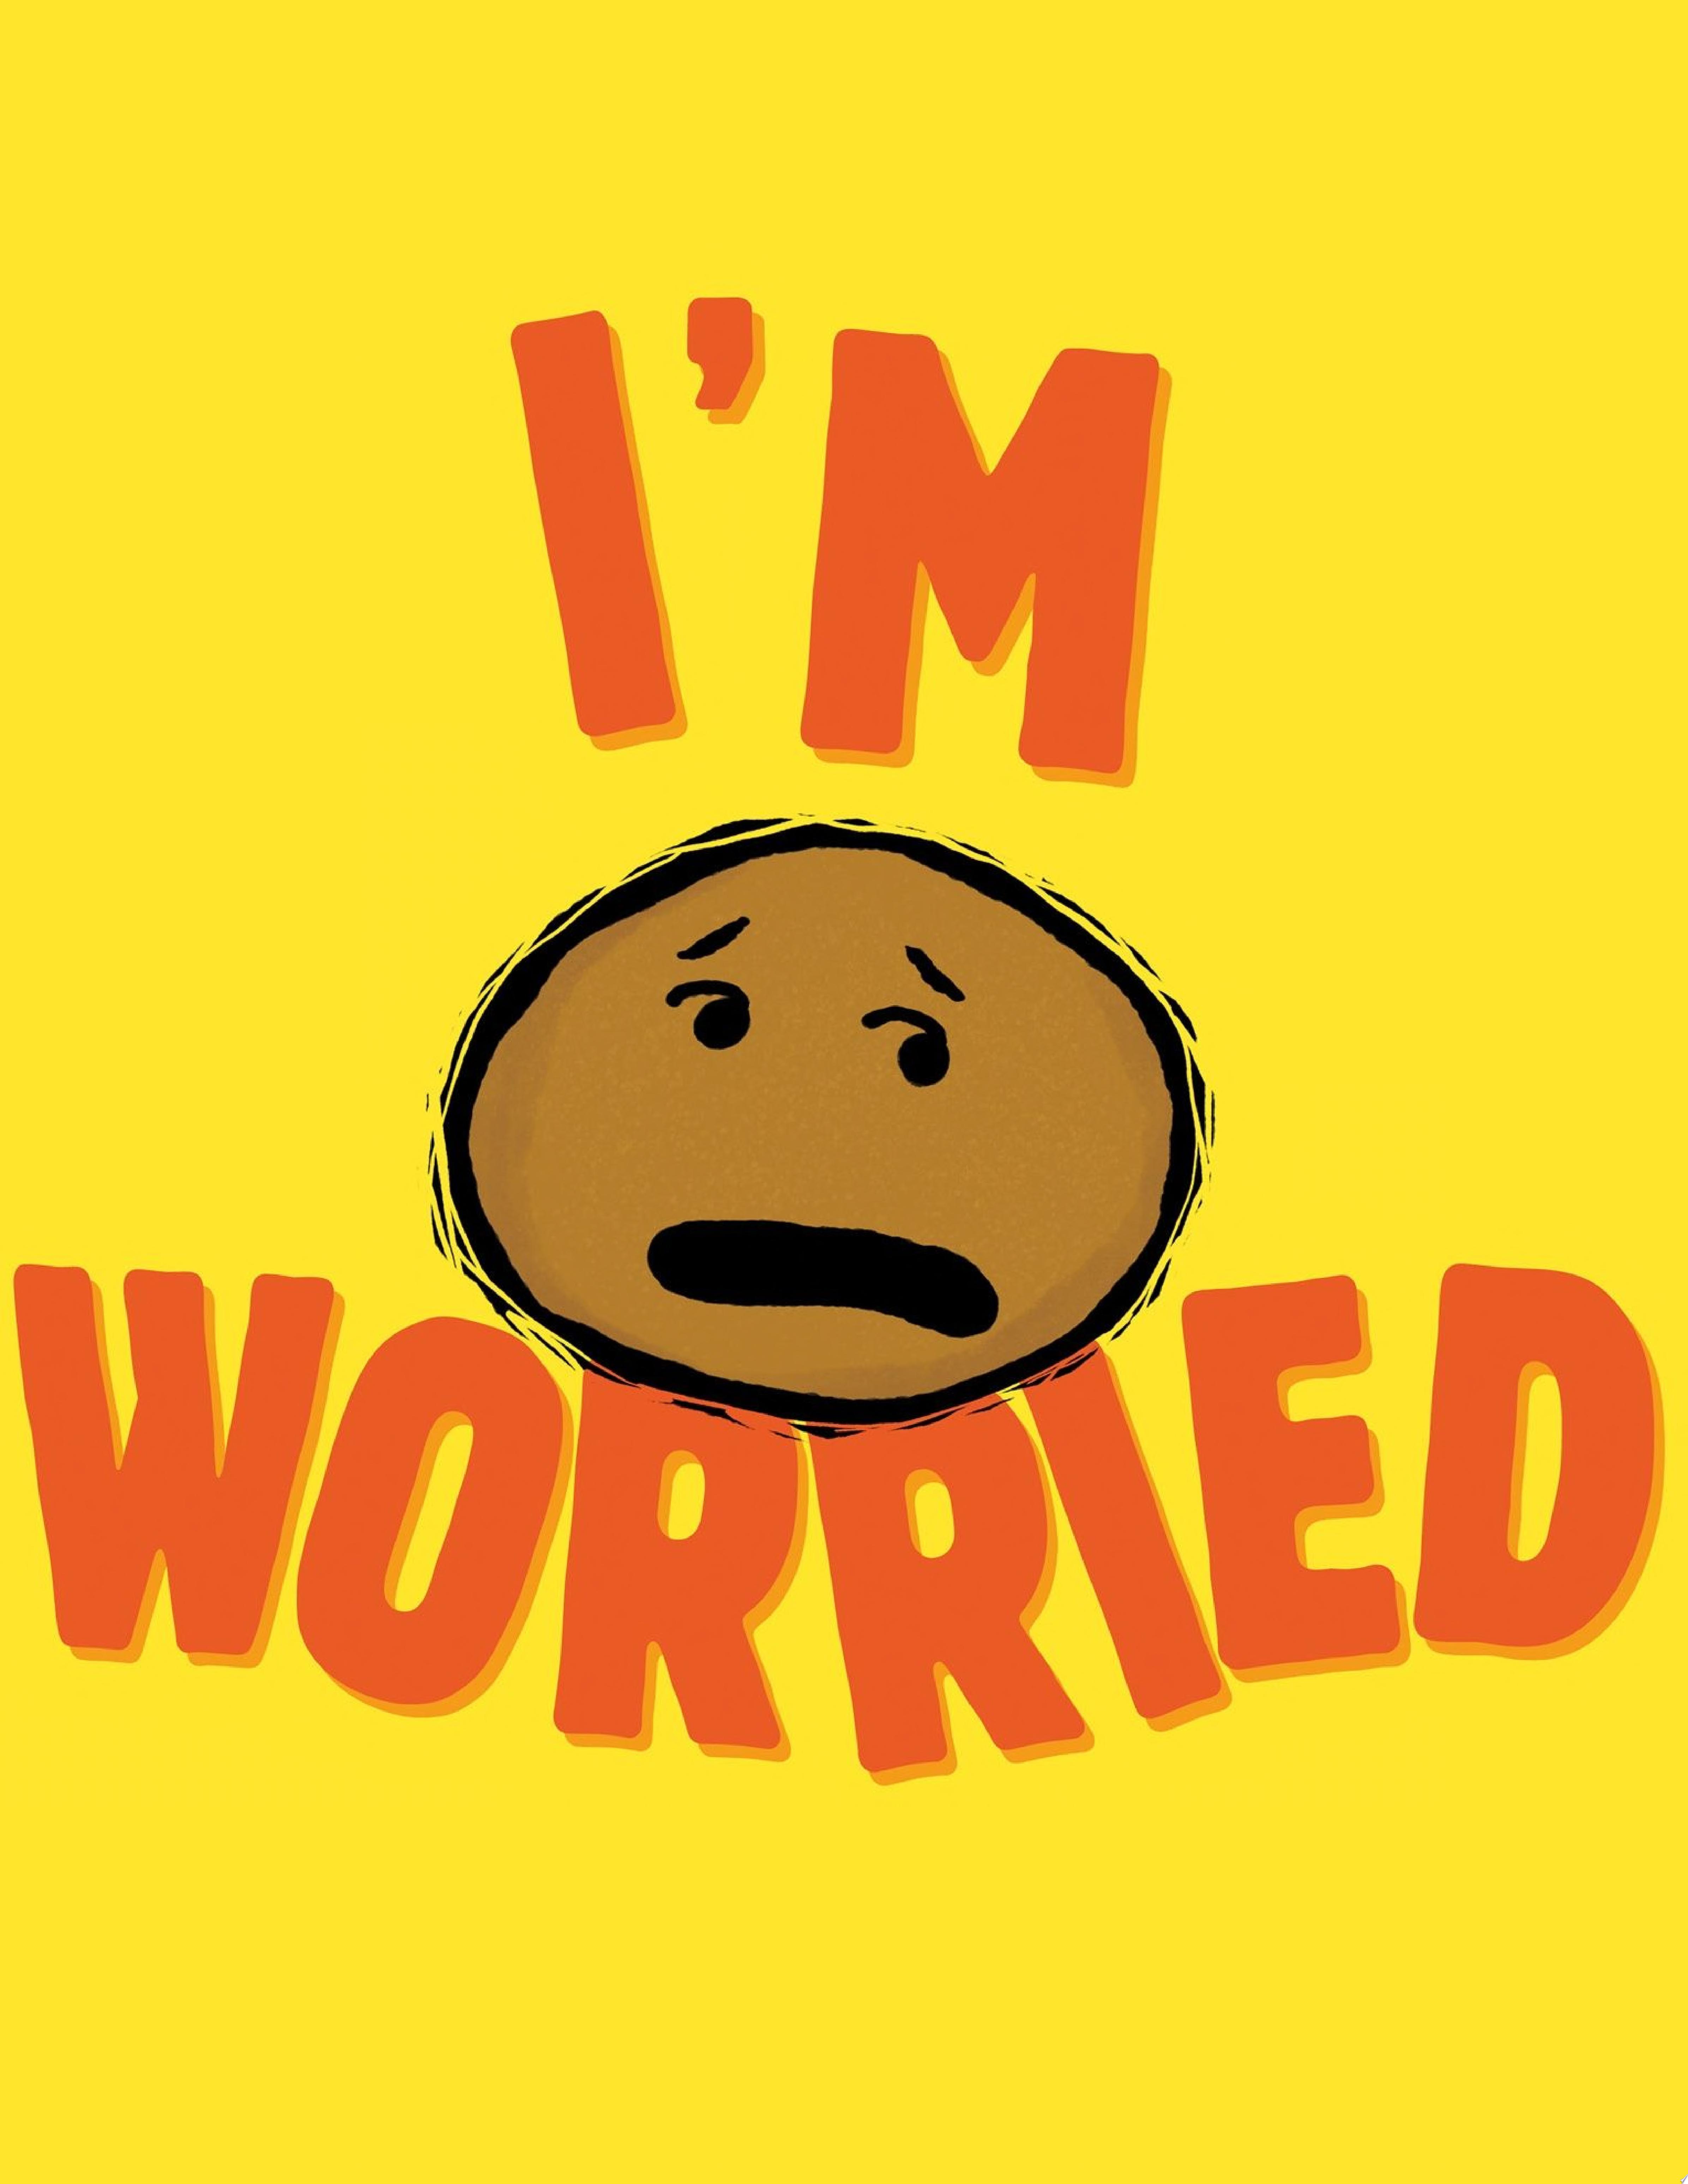 Image for "I'm Worried"